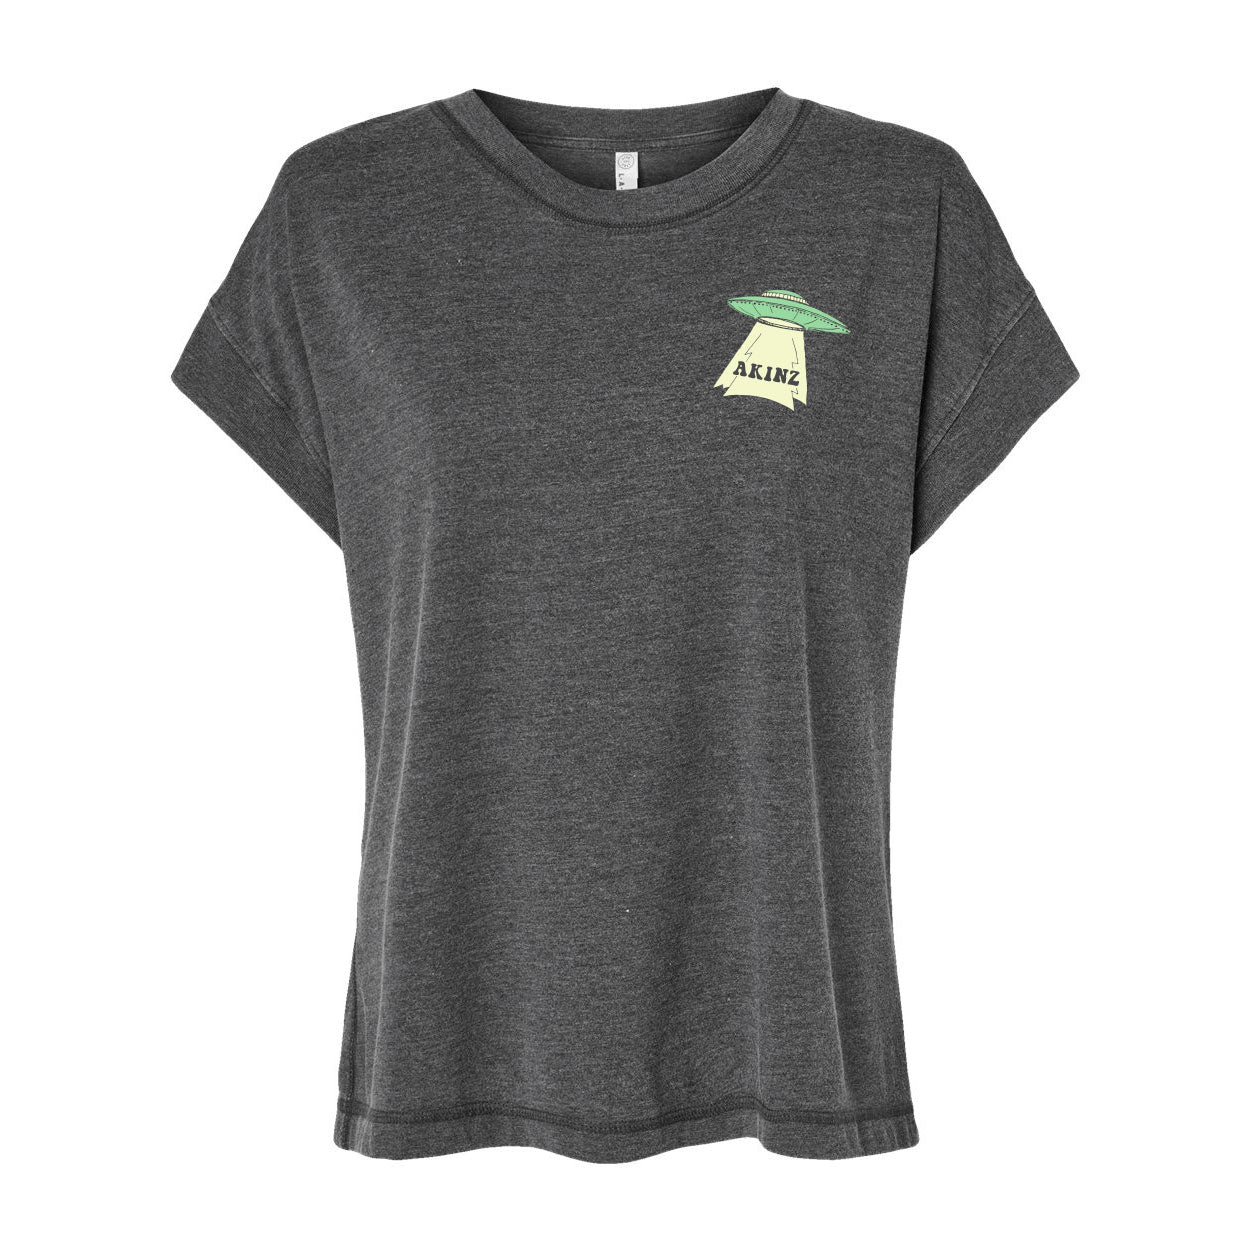 Leave No Trace Womens Vintage Top